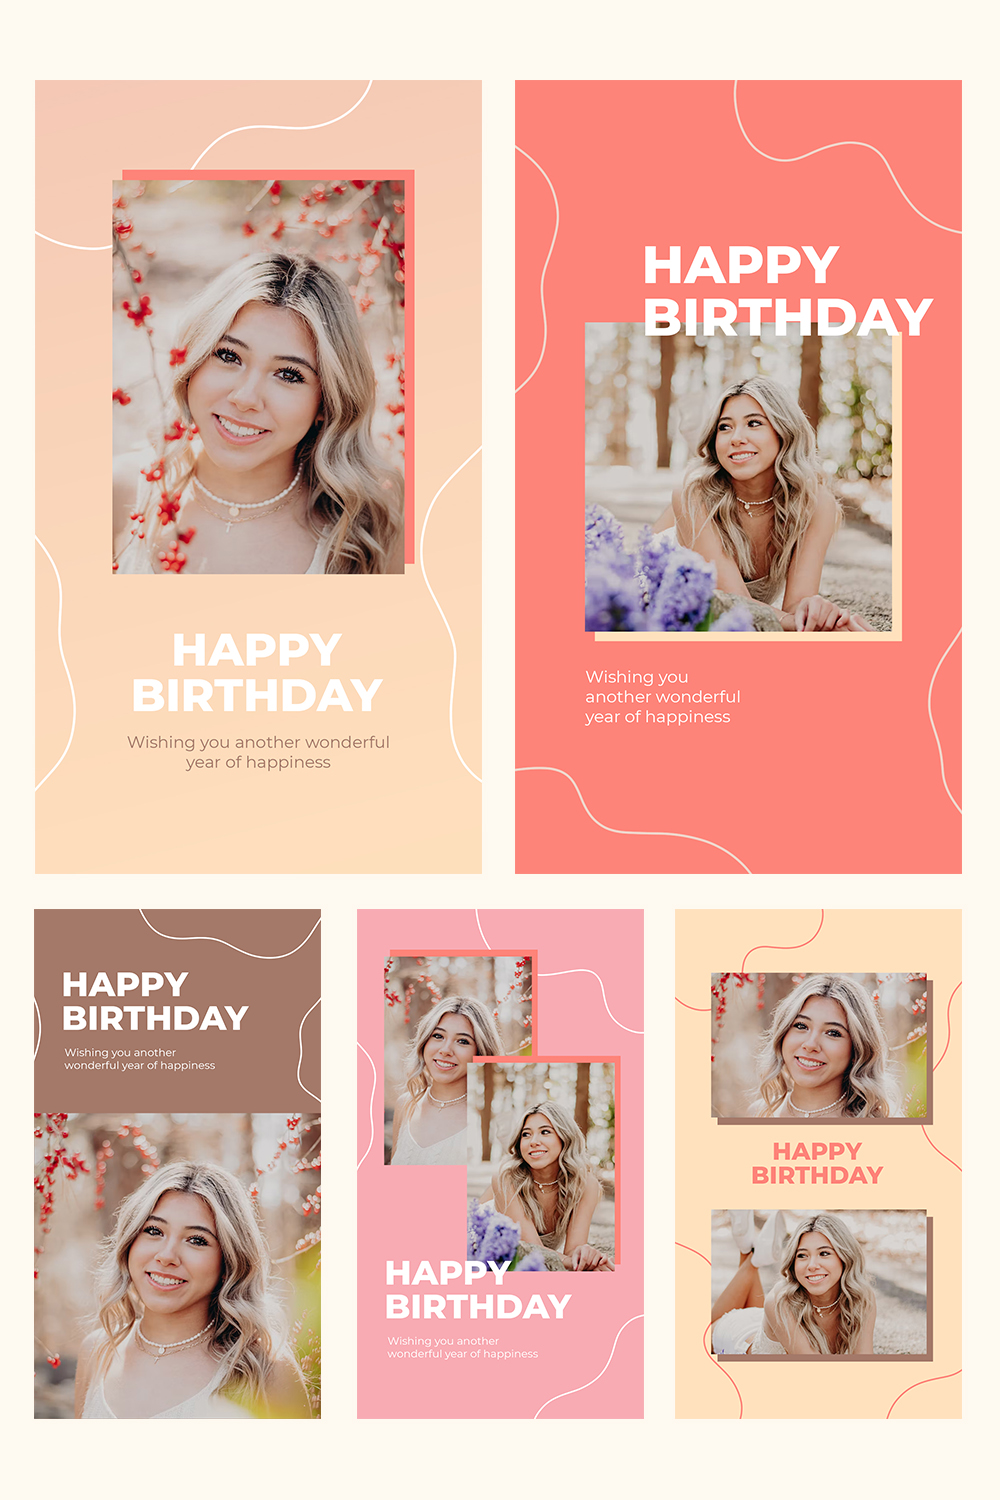 Peach Happy Birthday Instagram Story Templates modification for you.